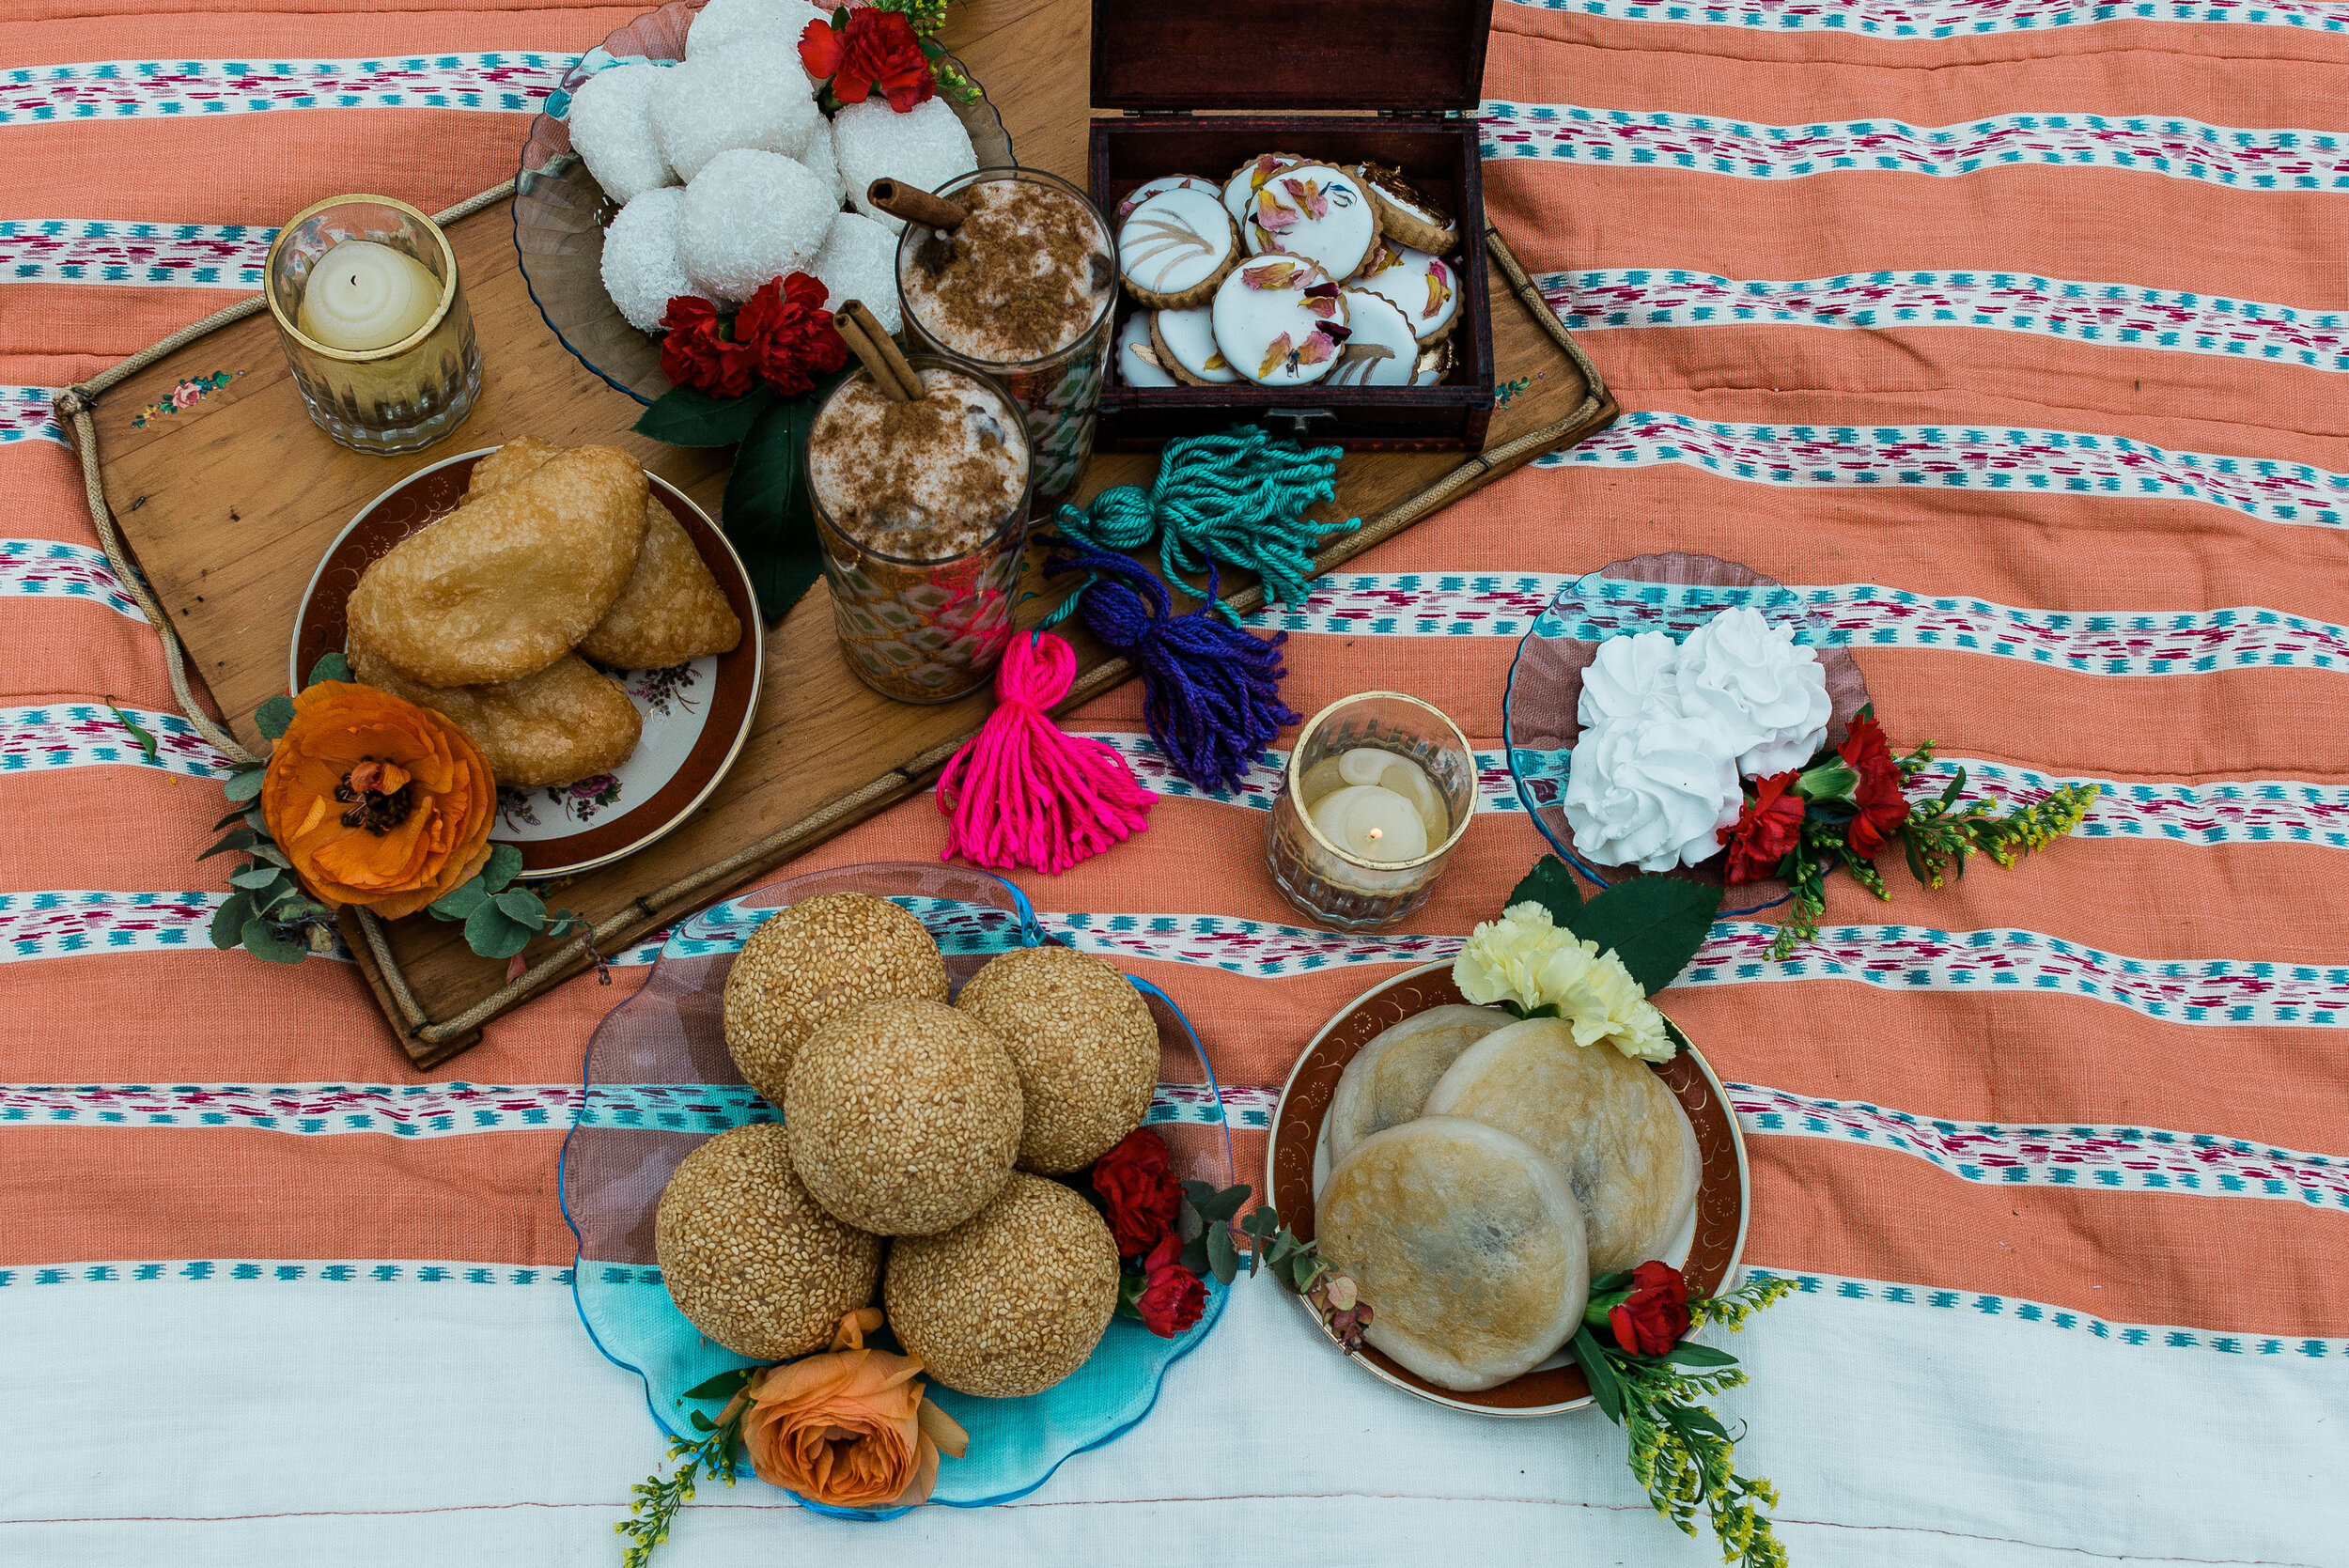 wedding picnic fare from Dominican and Chinese cultures laid out on blanket  (Copy)